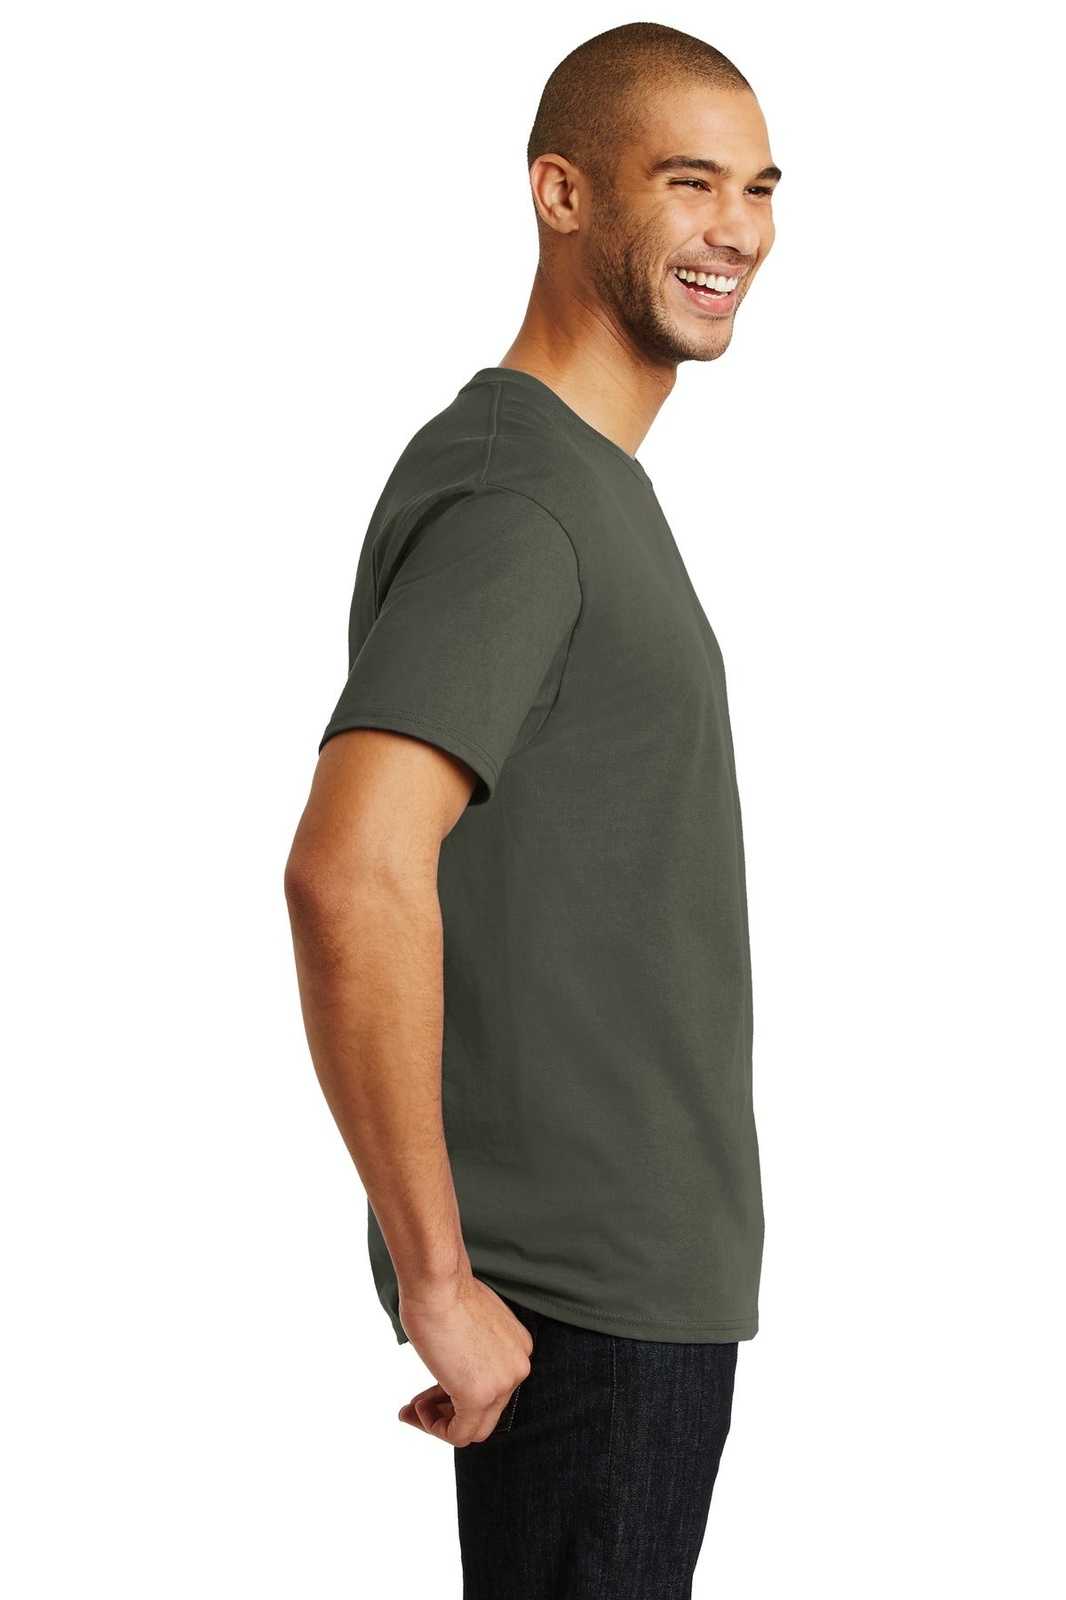 Hanes 5250 Tagless 100% Cotton T-Shirt - Fatigue Green - HIT a Double